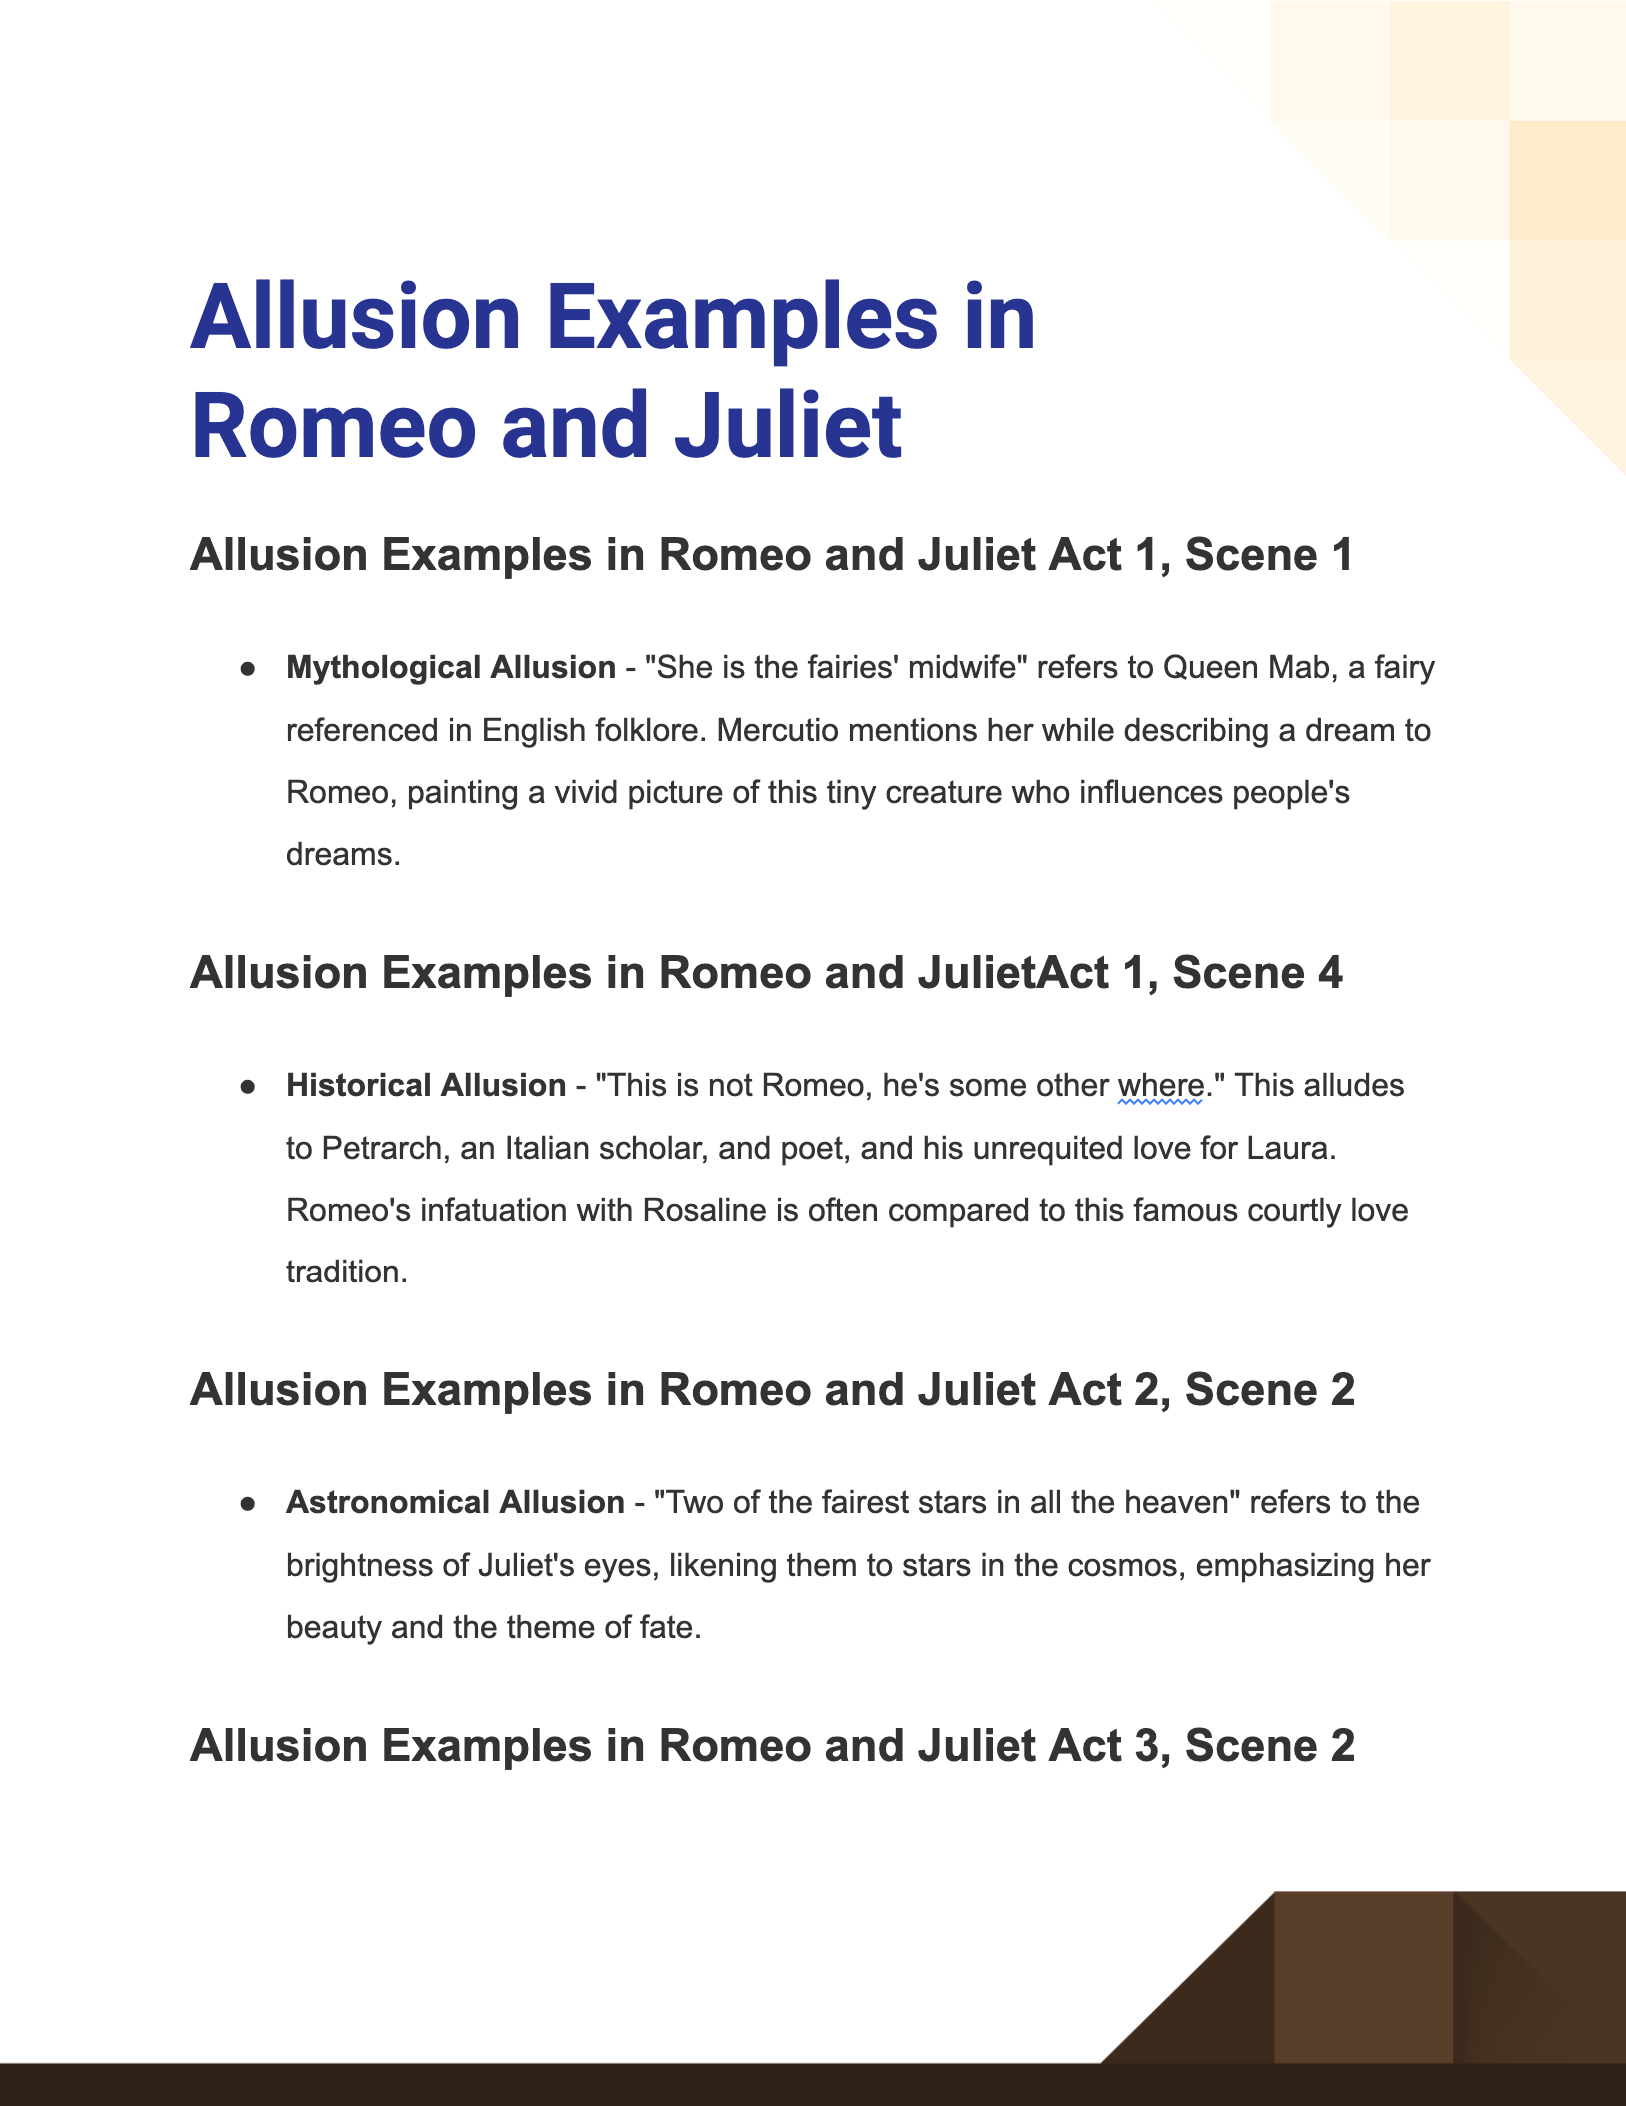 allusion examples in romeo and juliet1